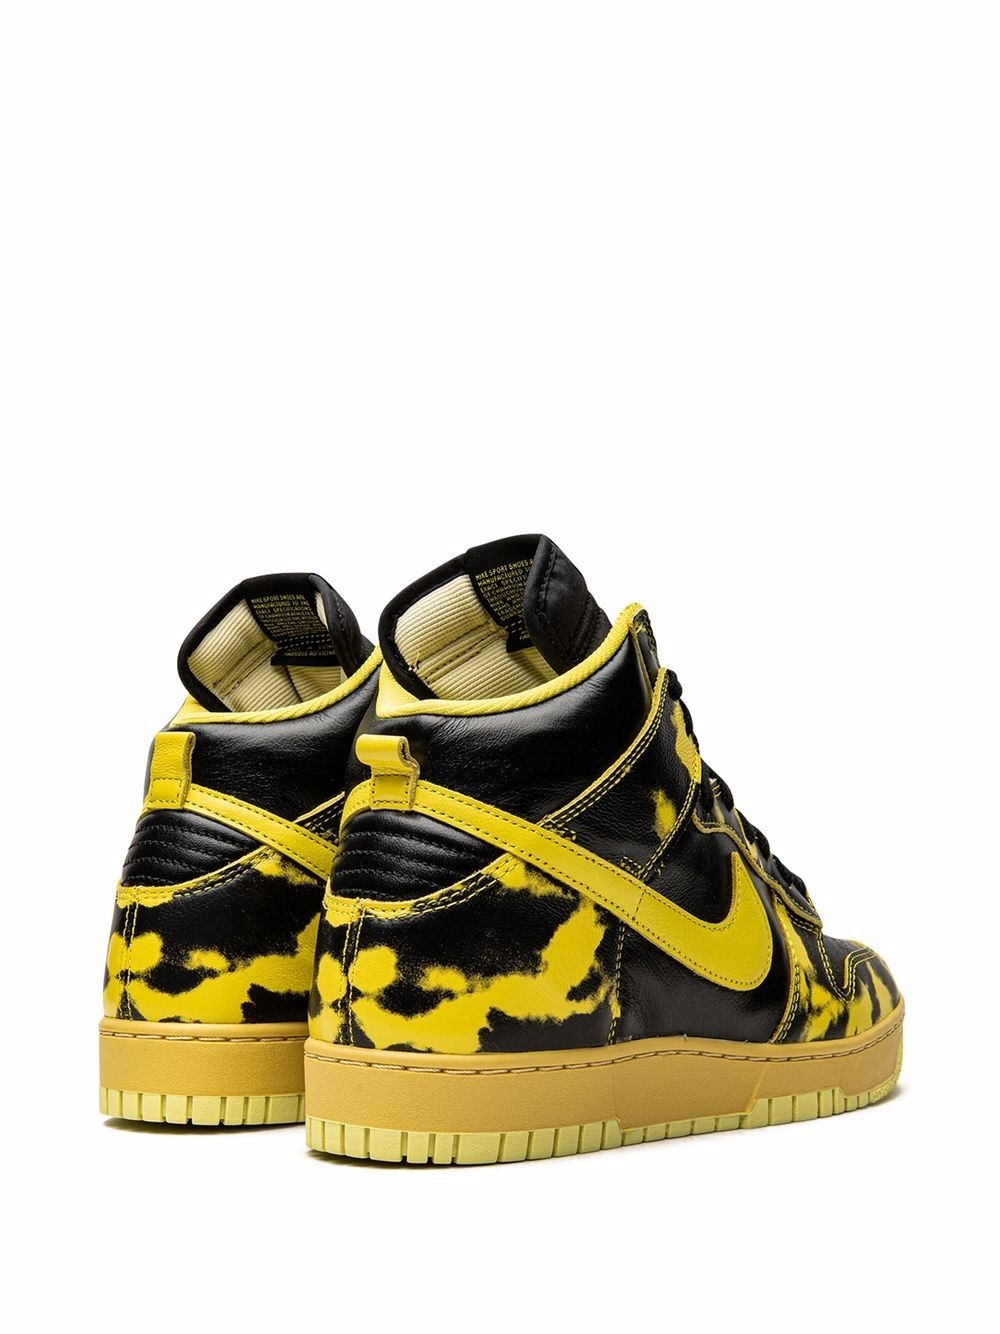 Dunk High 1985 "Yellow Acid Wash" sneakers - 3